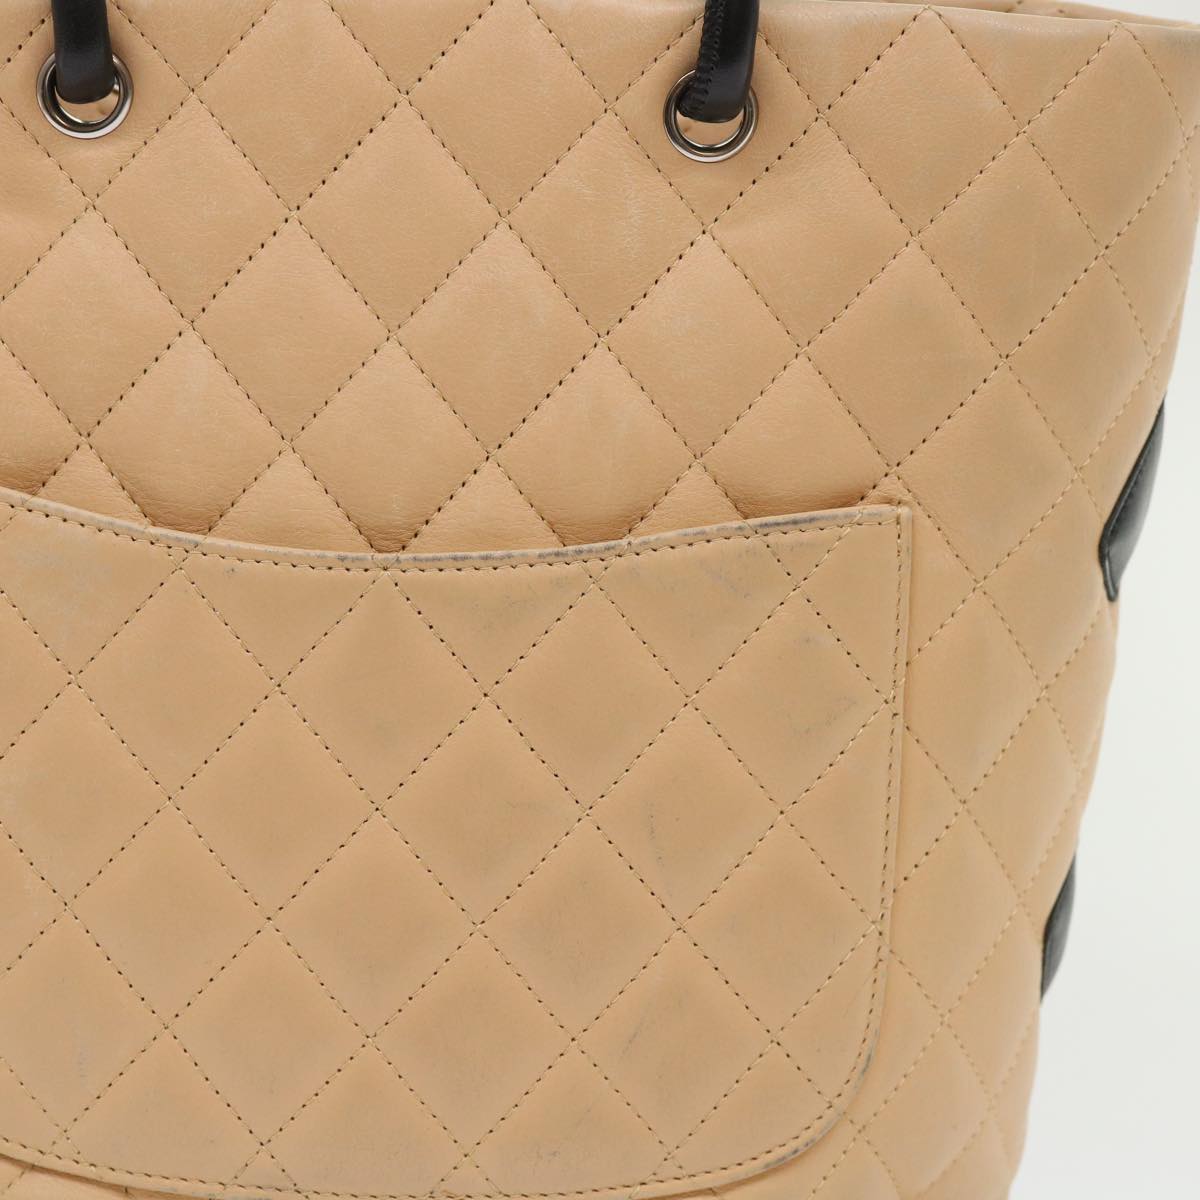 CHANEL Cambon Line Tote Bag Leather Beige CC Auth am4685